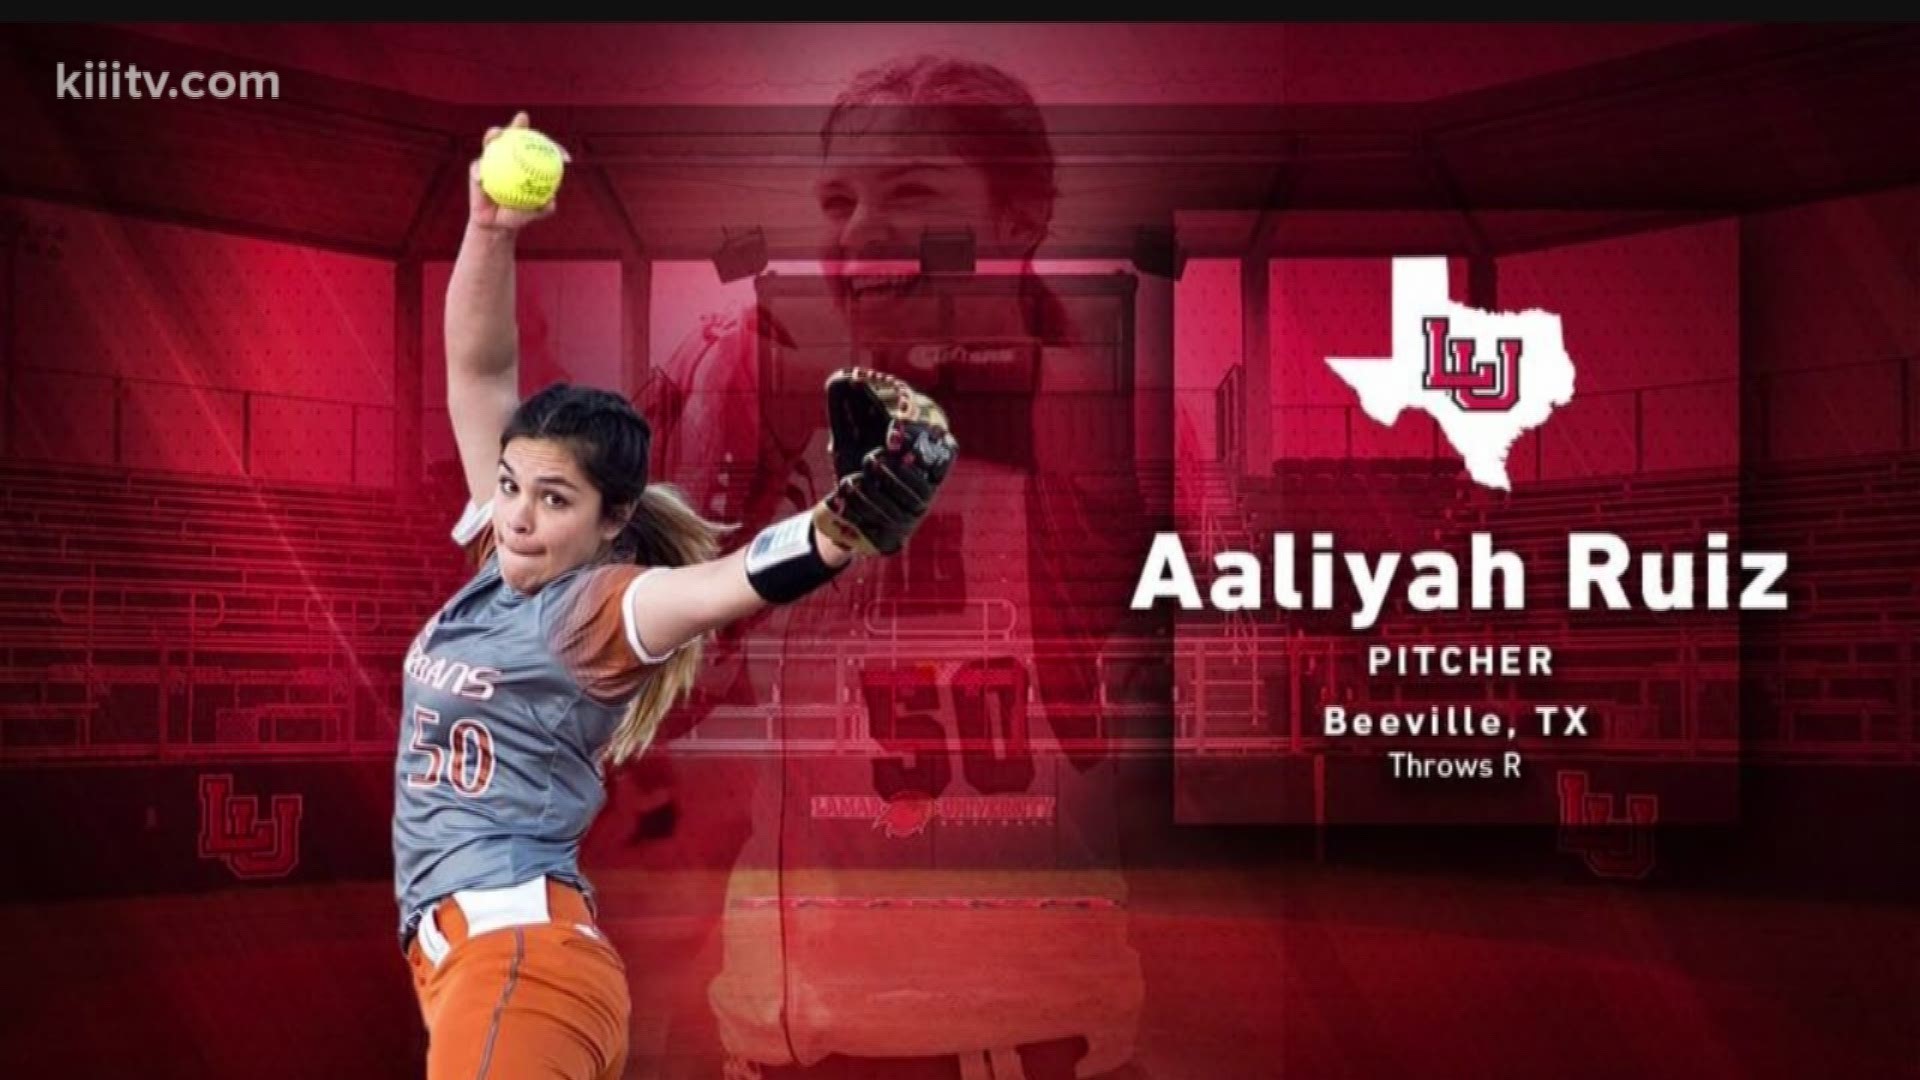 This week's 3News Athlete of the Week is Beeville softball's Aaliyah Ruiz. Ruiz, in her senior year, has been an ace for the Lady Trojans. Helping lead them to the State Semifinals last season and this season she's back at it again. Ruiz is approaching th